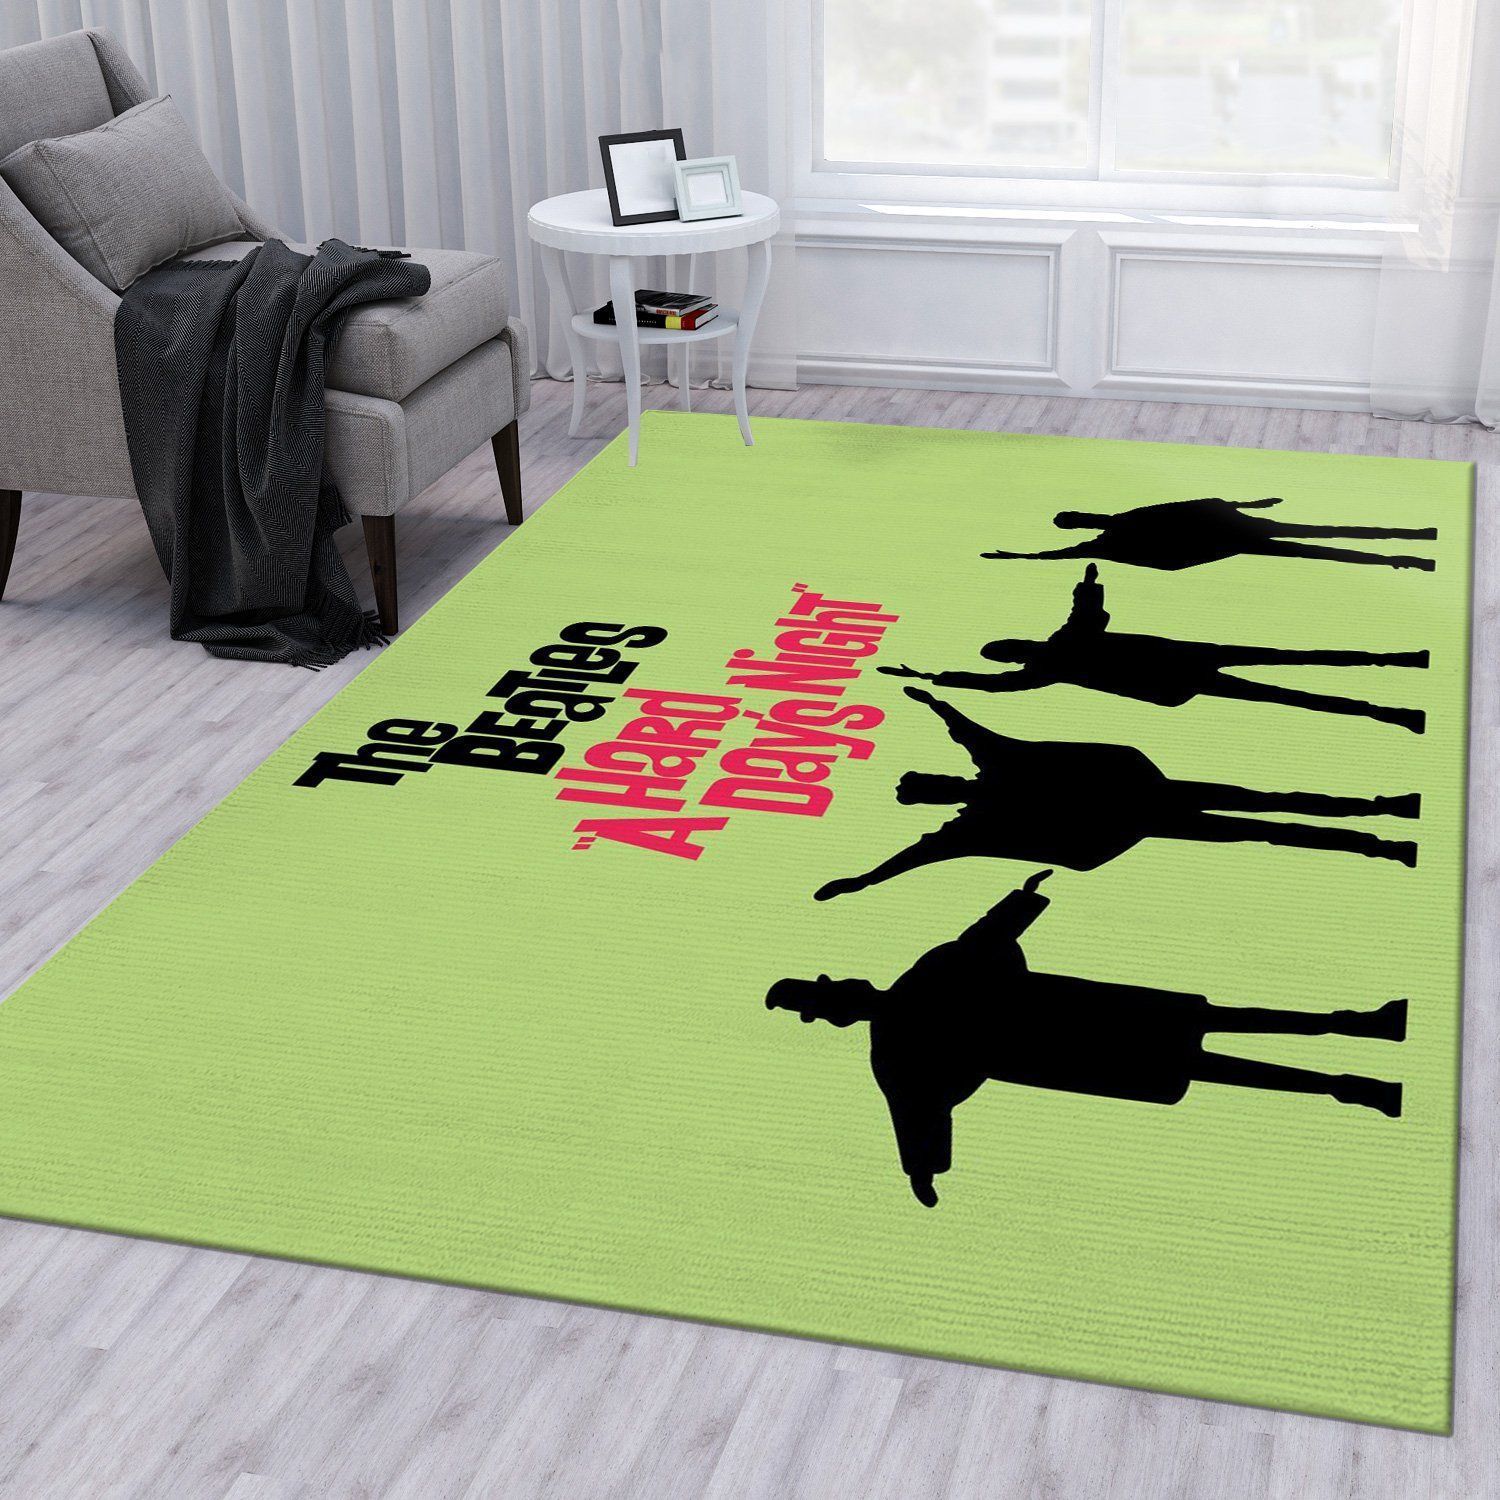 Green Apple The Beatles Area Rug For Christmas Living Room Rug Home US Decor - Indoor Outdoor Rugs